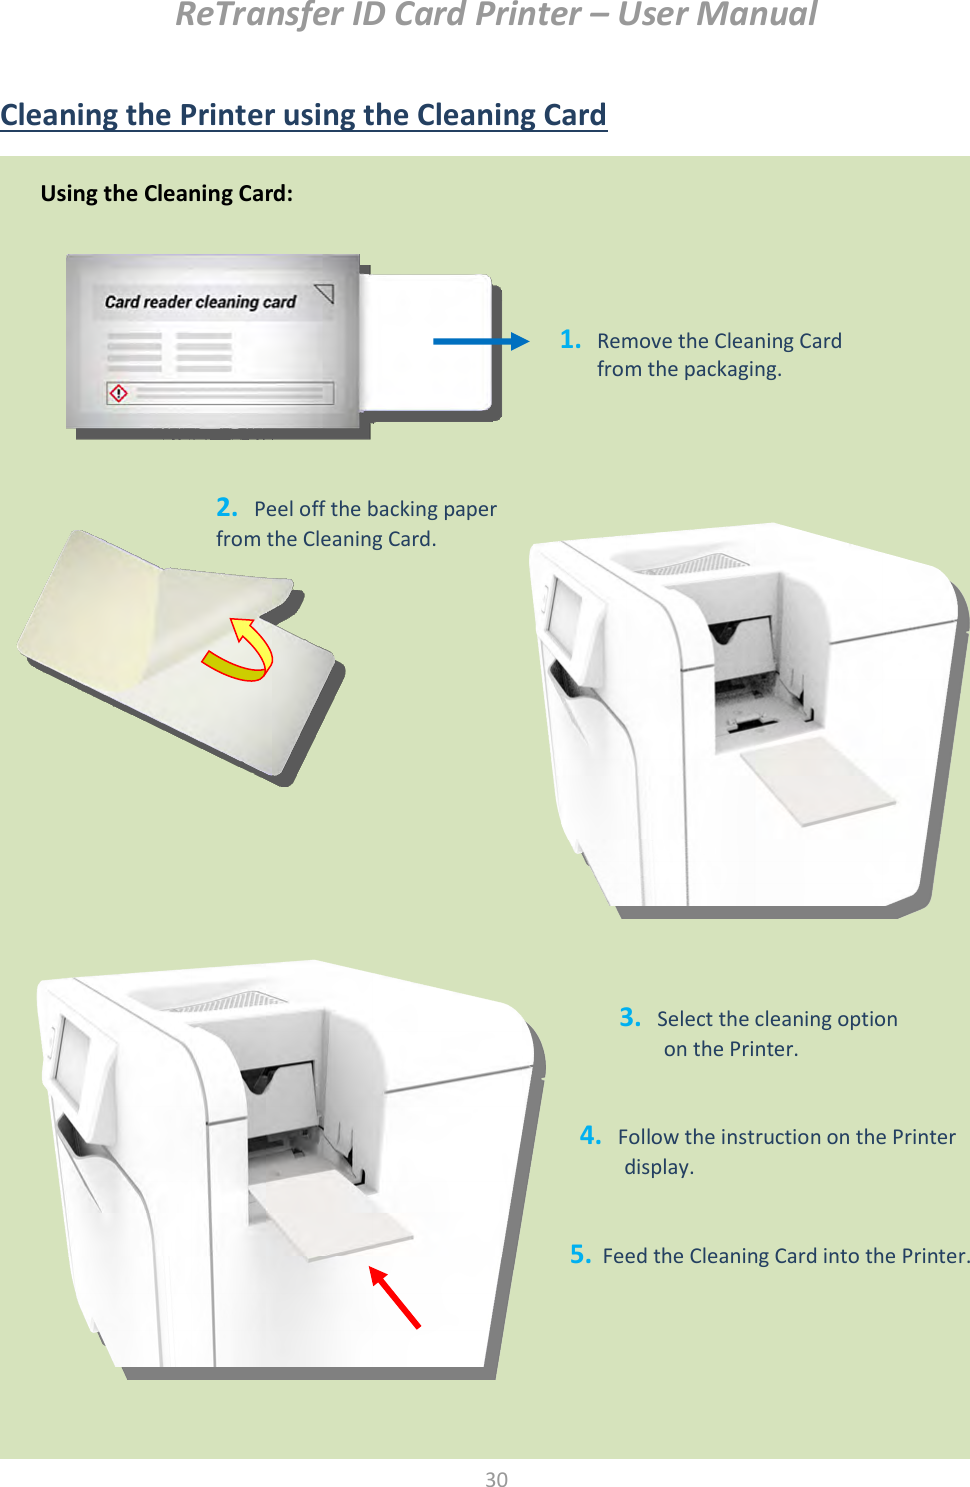 ReTransfer ID Card Printer – User Manual  30   Cleaning the Printer using the Cleaning Card   Using the Cleaning Card: 1. Remove the Cleaning Card from the packaging. 2.   Peel off the backing paper from the Cleaning Card. 3.   Select the cleaning option   on the Printer. 4.   Follow the instruction on the Printer display.  5.  Feed the Cleaning Card into the Printer. 